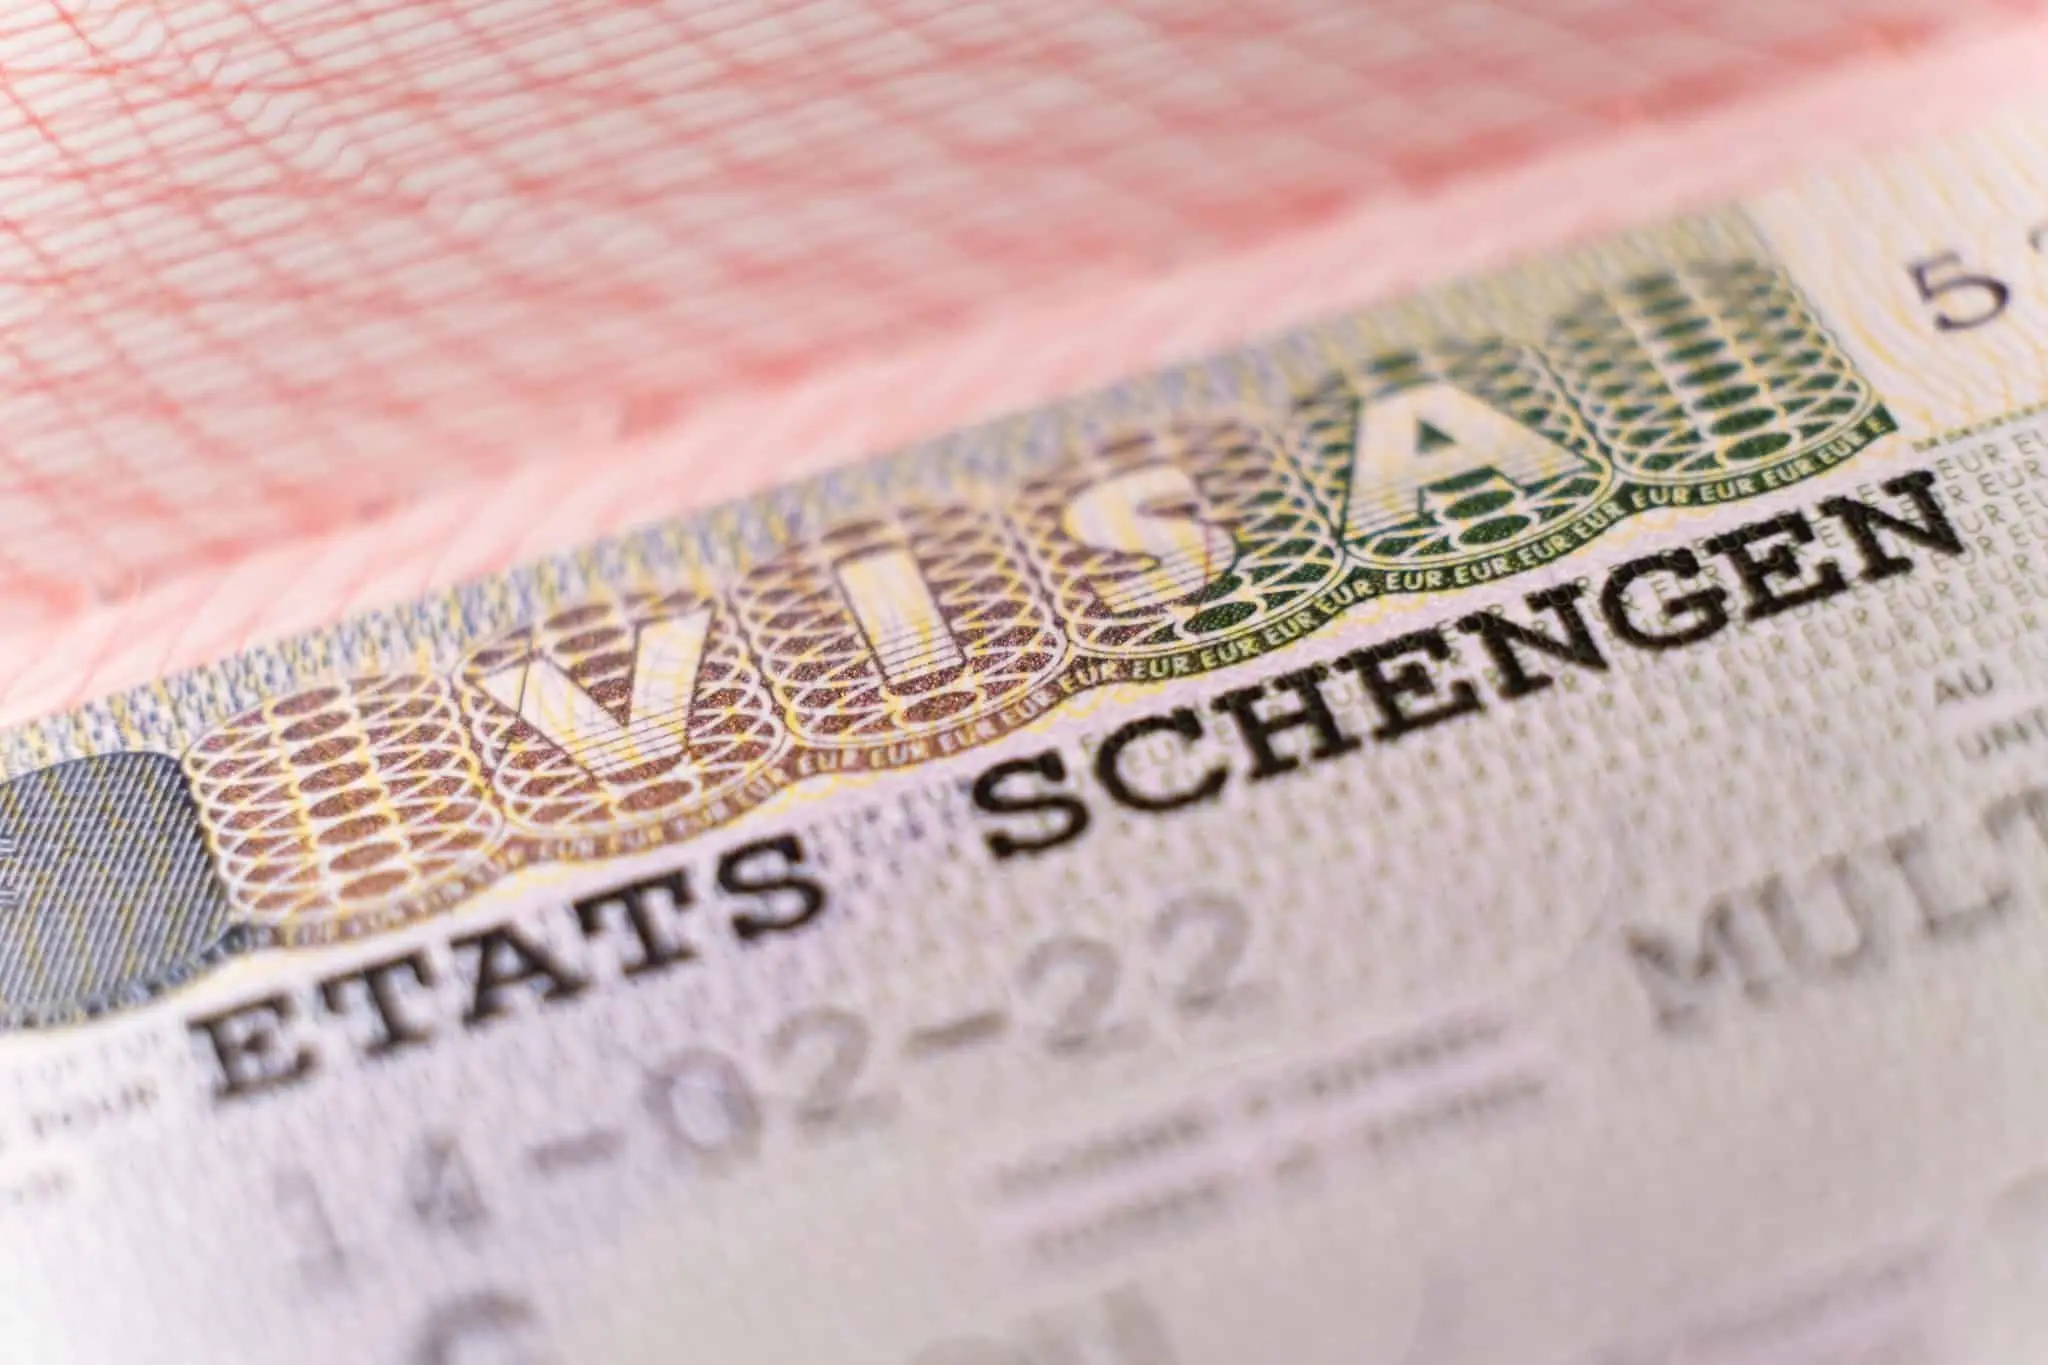 UAE to Introduce New ‘Schengen-style’ Visa System for GCC Countries, Promoting Regional Integration and Easy Travel